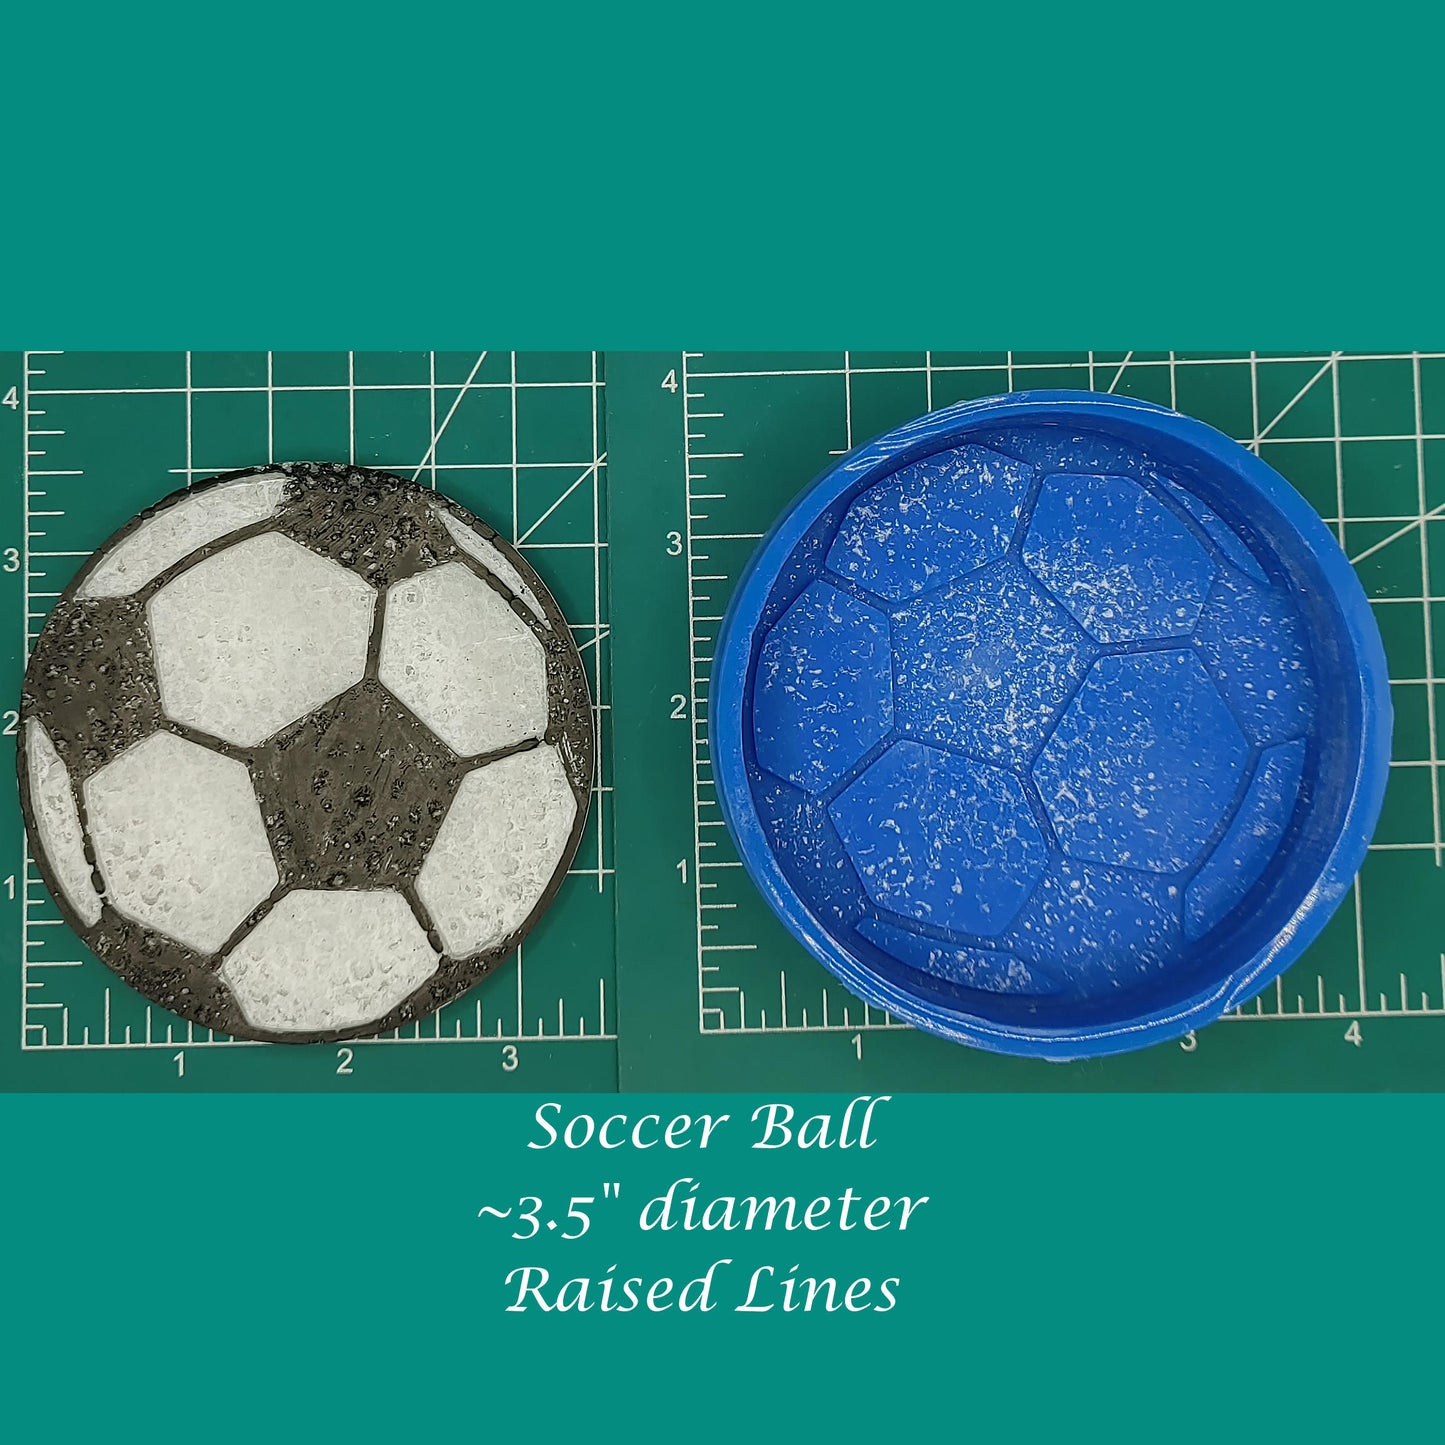 Wowlab Football Freshie Molds, Sports Silicone Molds for Freshies